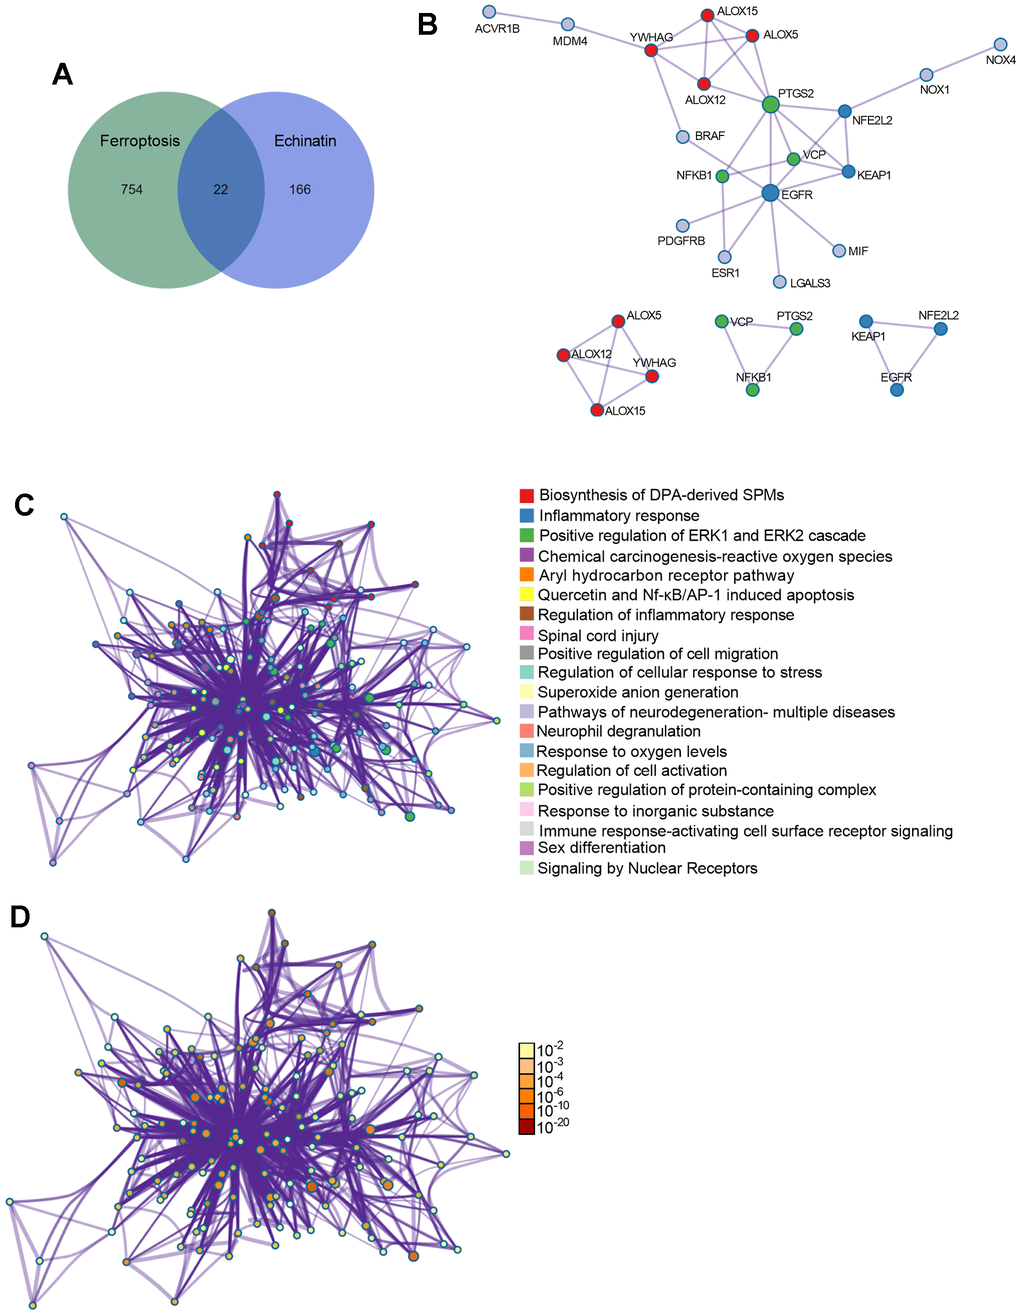 The co-differentially expressed genes in Echinatin and ferroptosis. (A) The Venn graph of overlap genes in both Echinatin and ferroptosis. (B) PPI network and key functional modules of Echinatin against ferroptosis. The enrichment of overlap genes using the Metascape database. Network of enriched terms: (C) colored by cluster ID, where nodes that share the same cluster ID are typically close to each other; (D) colored by p-value, where terms containing more genes tend to have a more significant p-value.